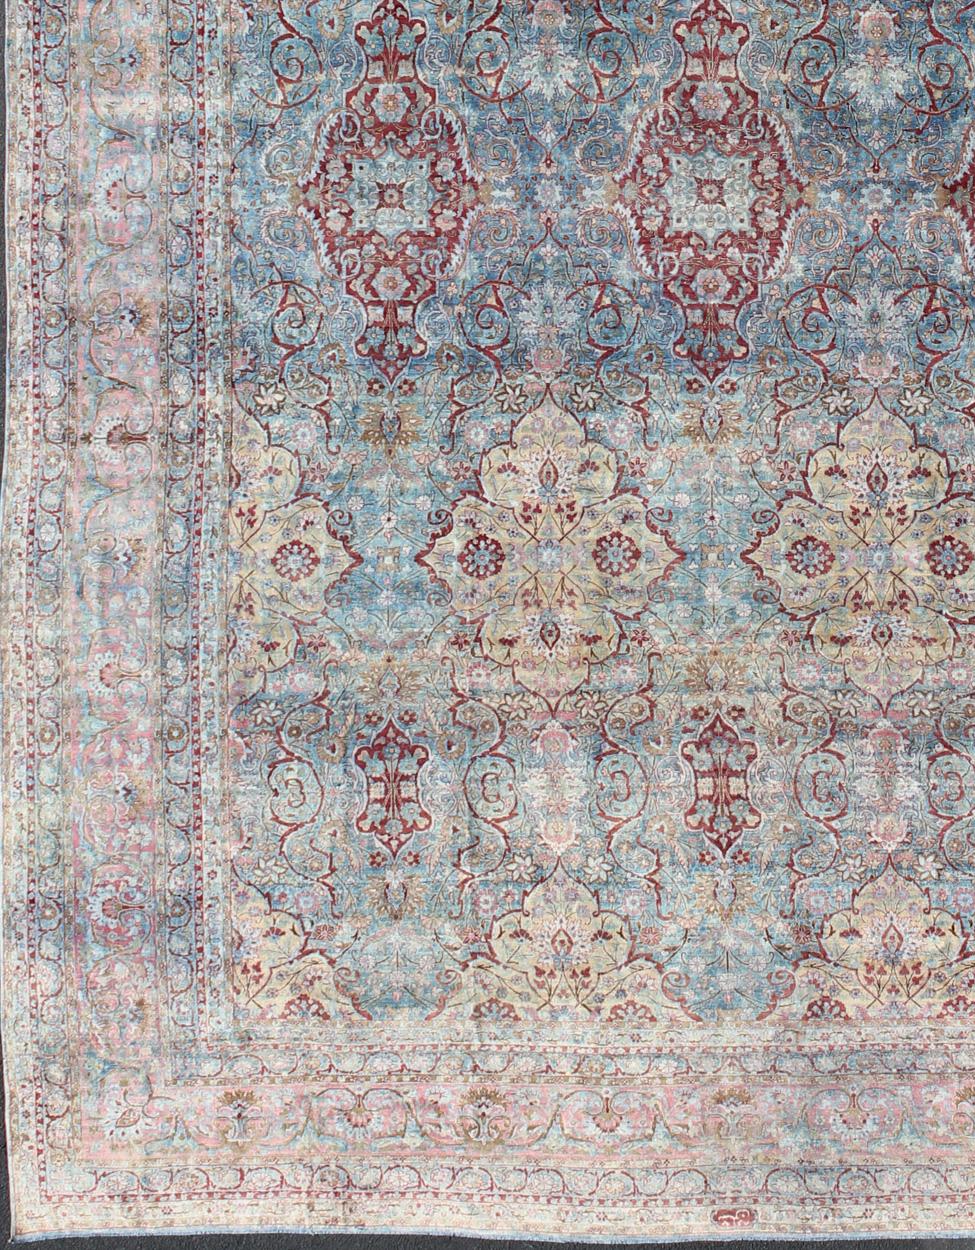 Large Antique Persian Kerman Rug with Medallions in Light Blue, Red and Pink. Large antique Persian Kerman rug with vertical medallions in light blue, red and pink. Keivan Woven Arts / rug 18-0201, country of origin / type: Iran / Kerman, circa